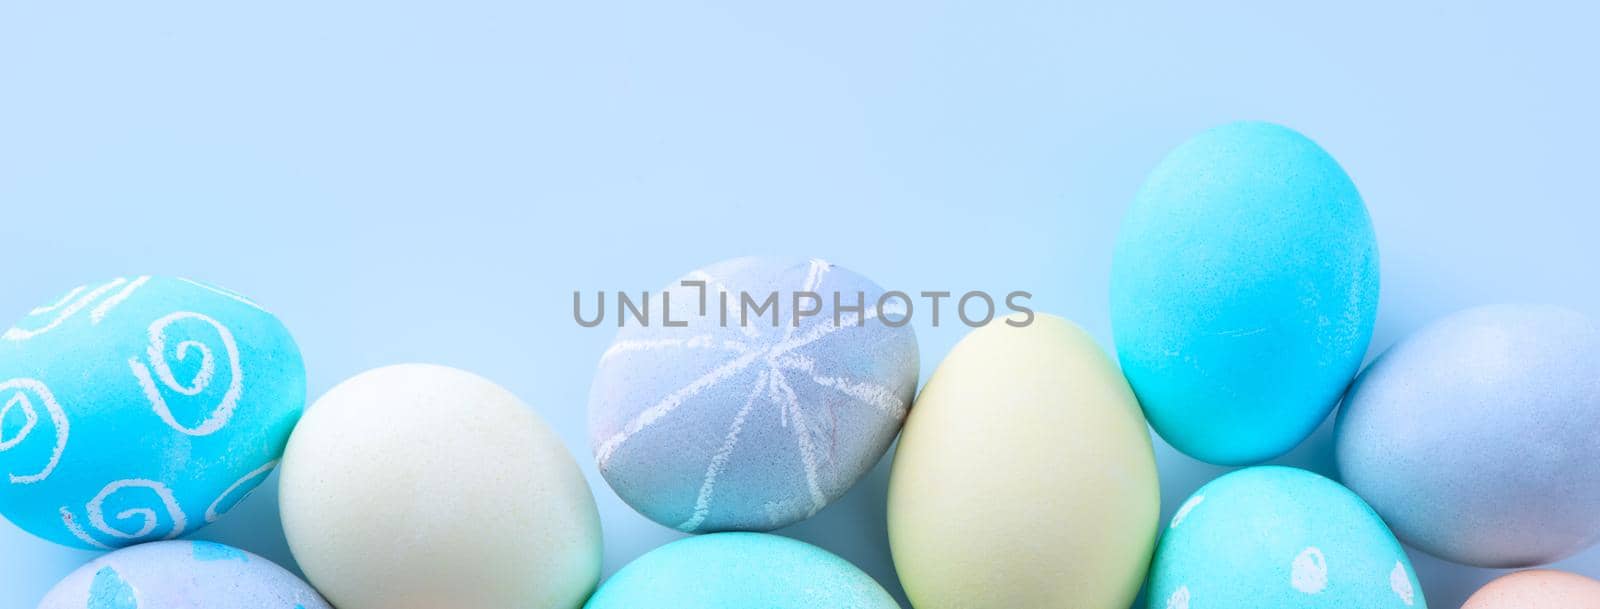 Colorful Easter eggs dyed by colored water with beautiful pattern on a pale blue background, design concept of holiday activity, top view, copy space.